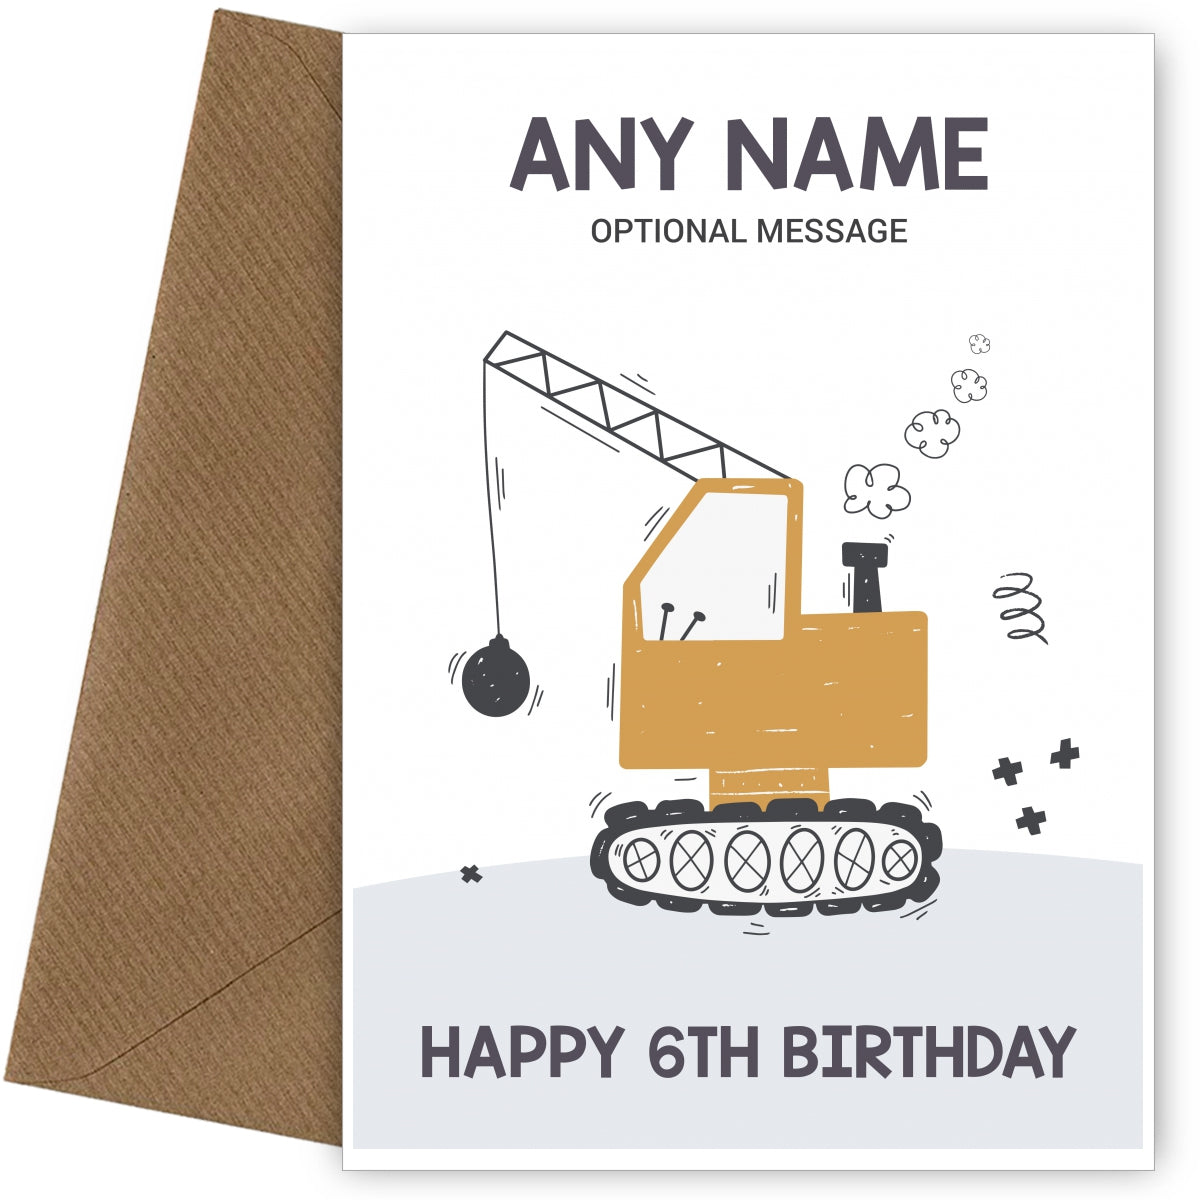 6th Birthday Card for Any Name - Wrecking Ball